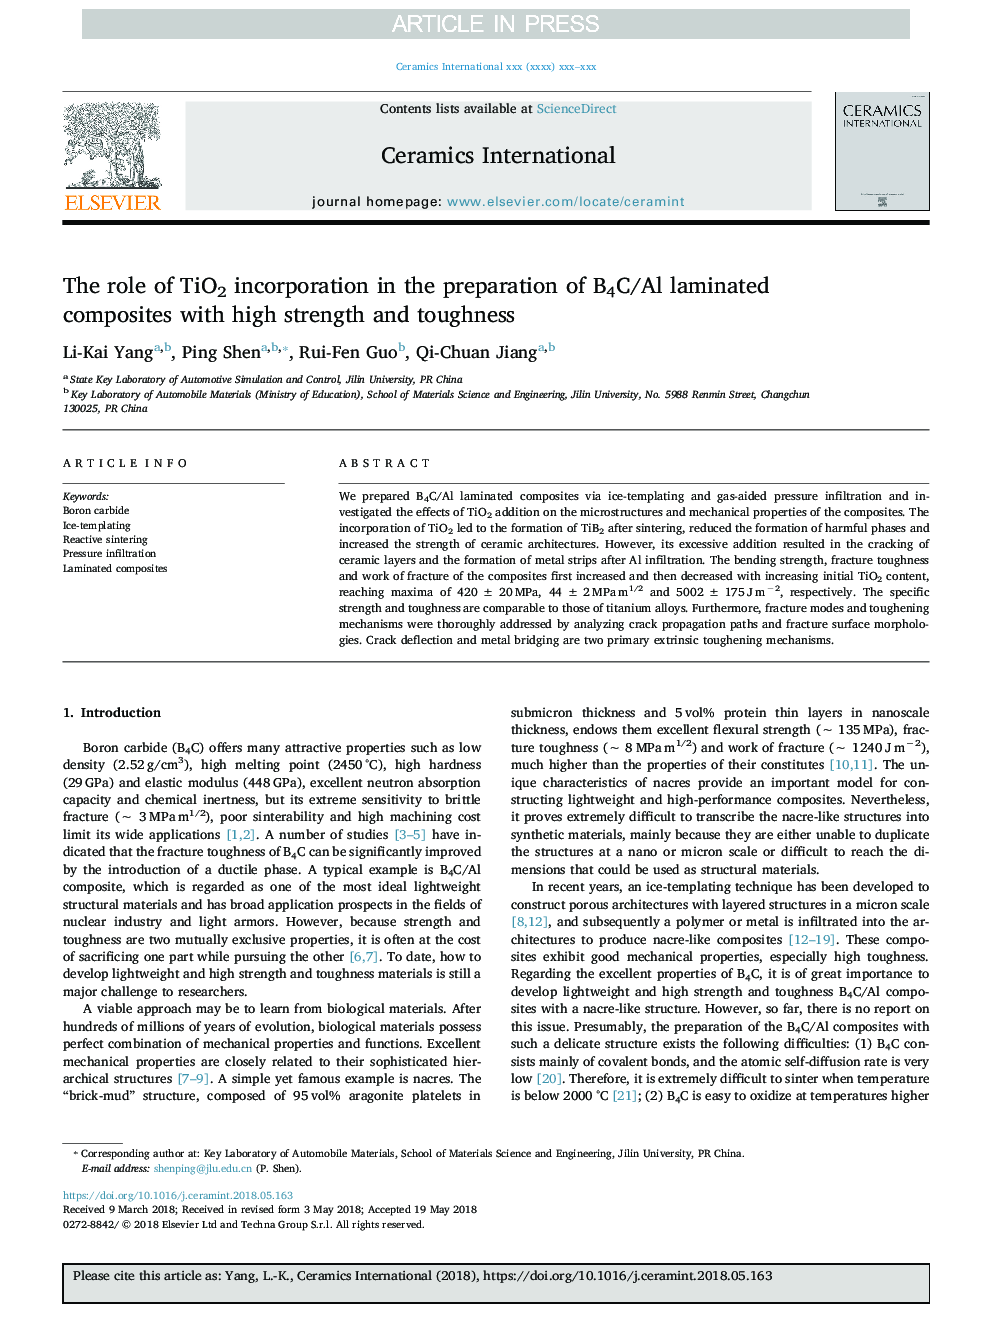 The role of TiO2 incorporation in the preparation of B4C/Al laminated composites with high strength and toughness